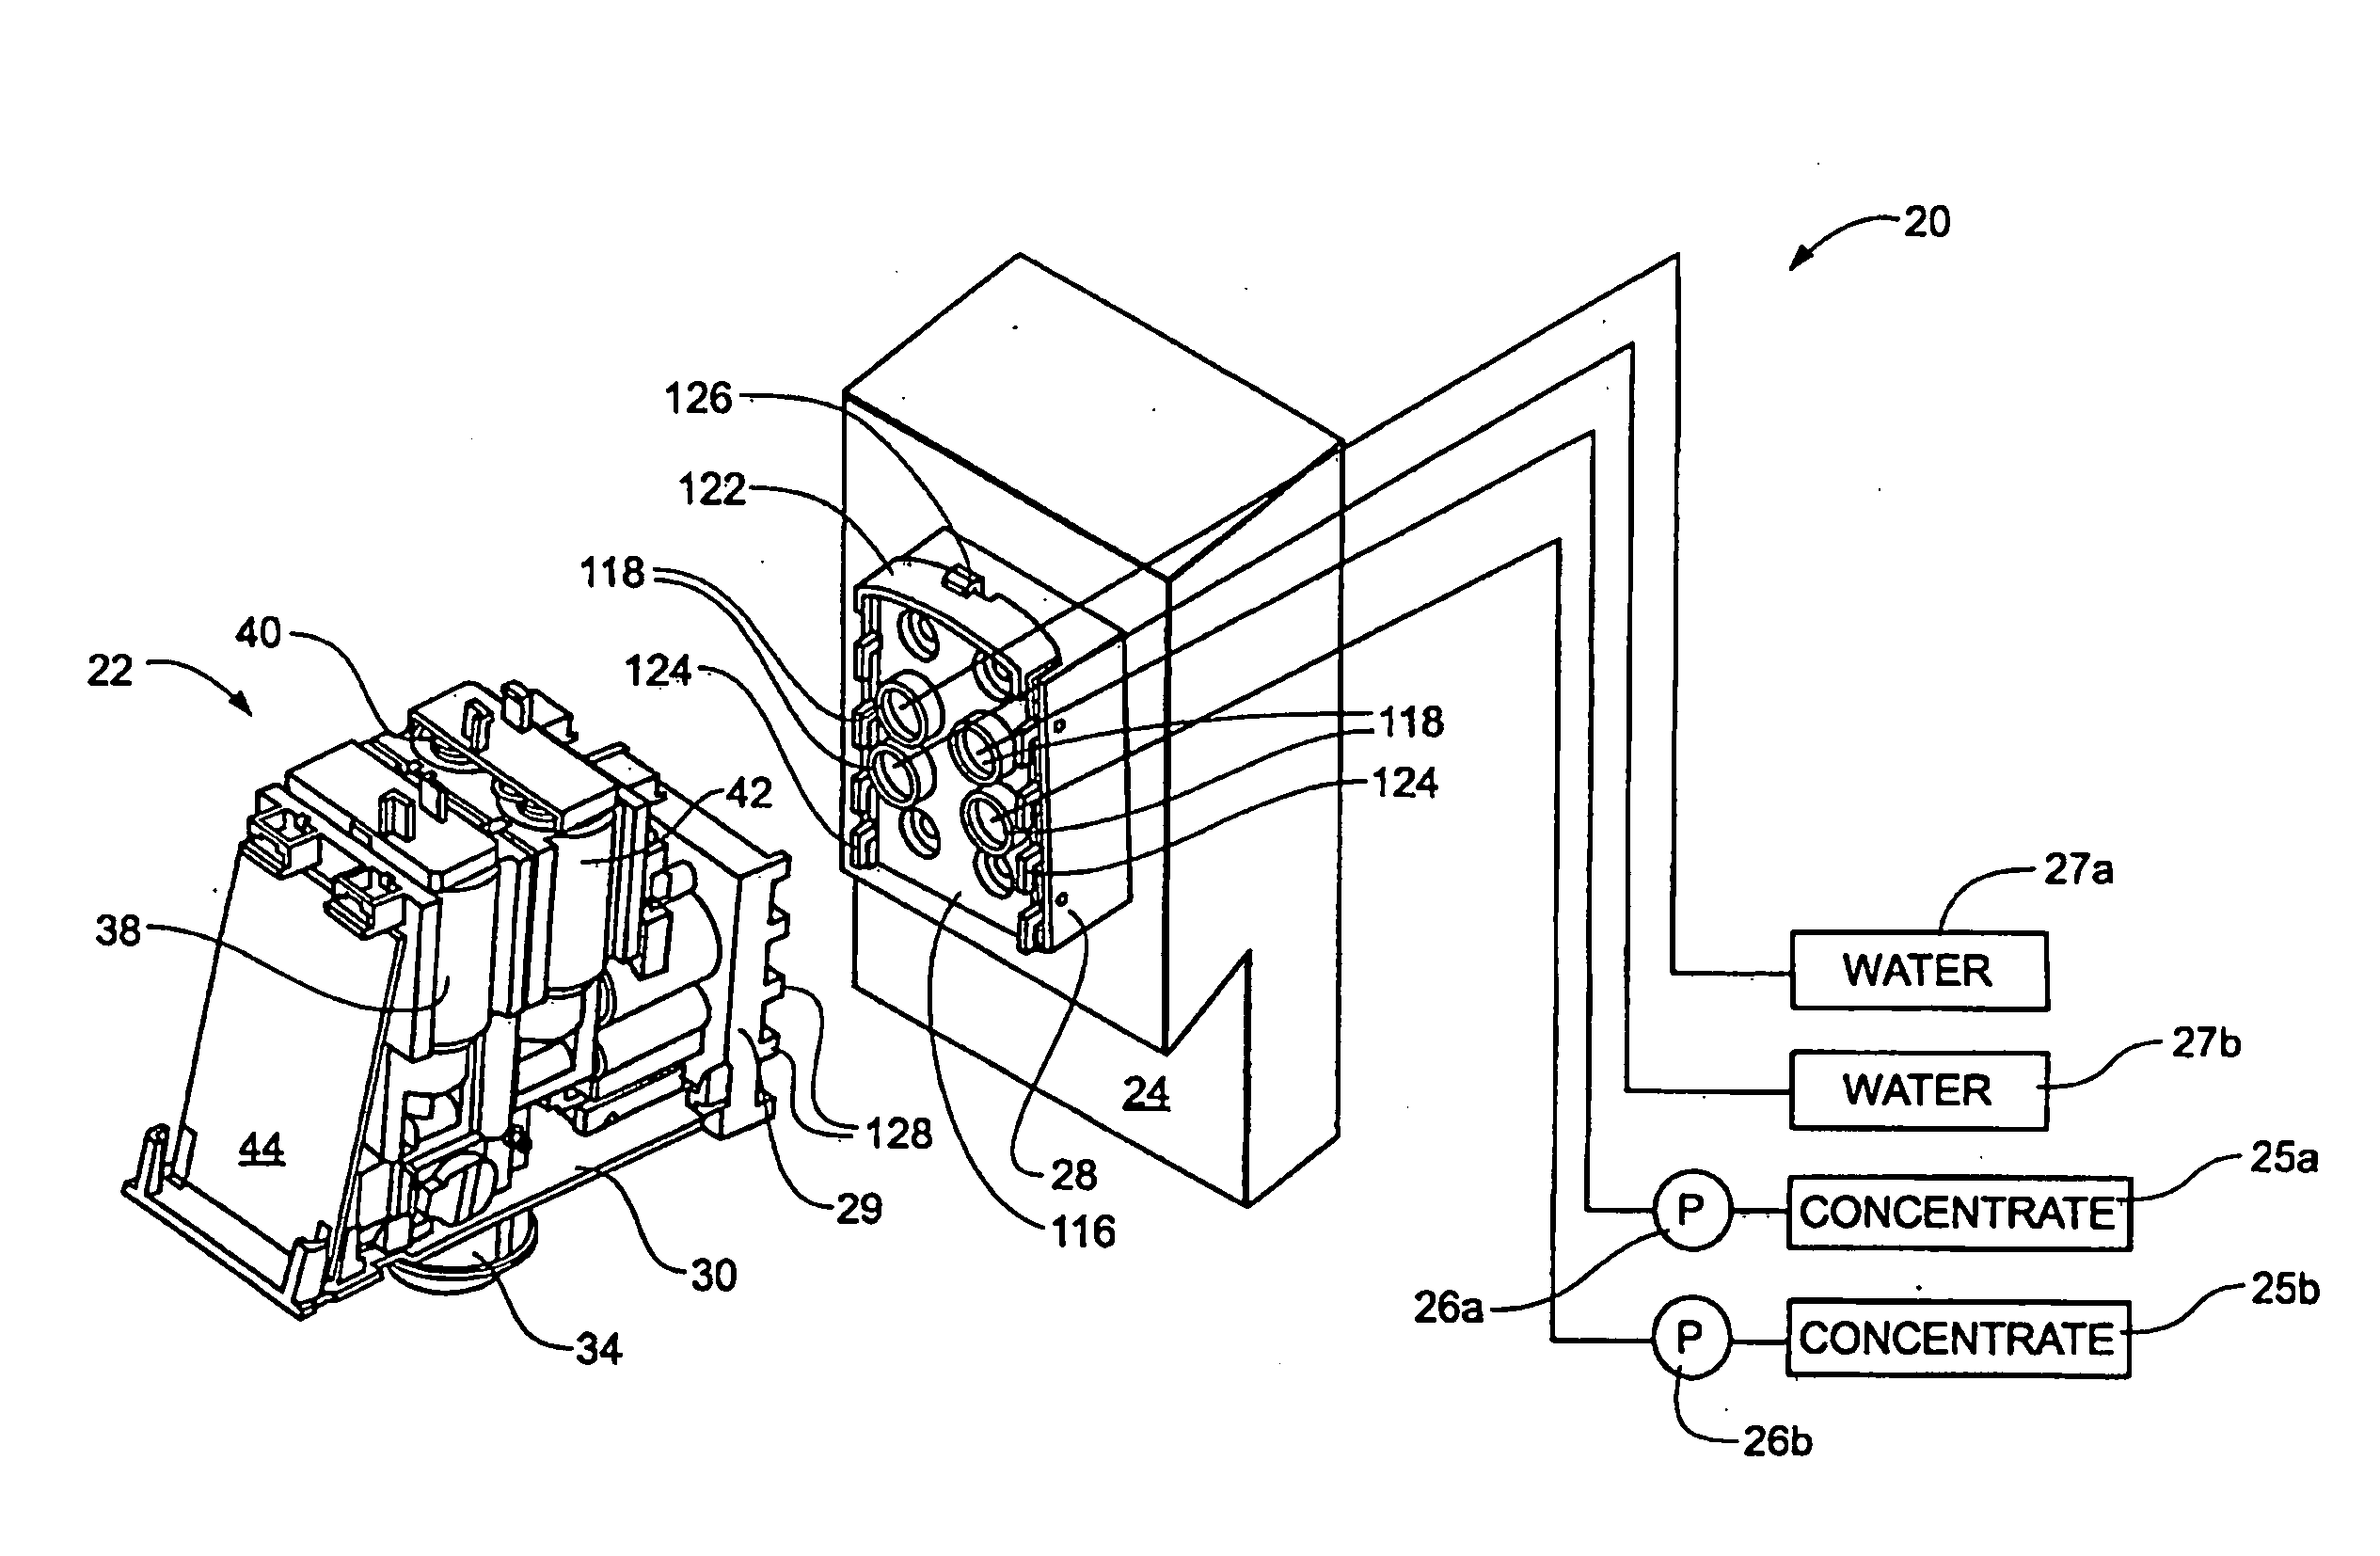 Beverage dispensing system with a head capable of dispensing plural different beverages